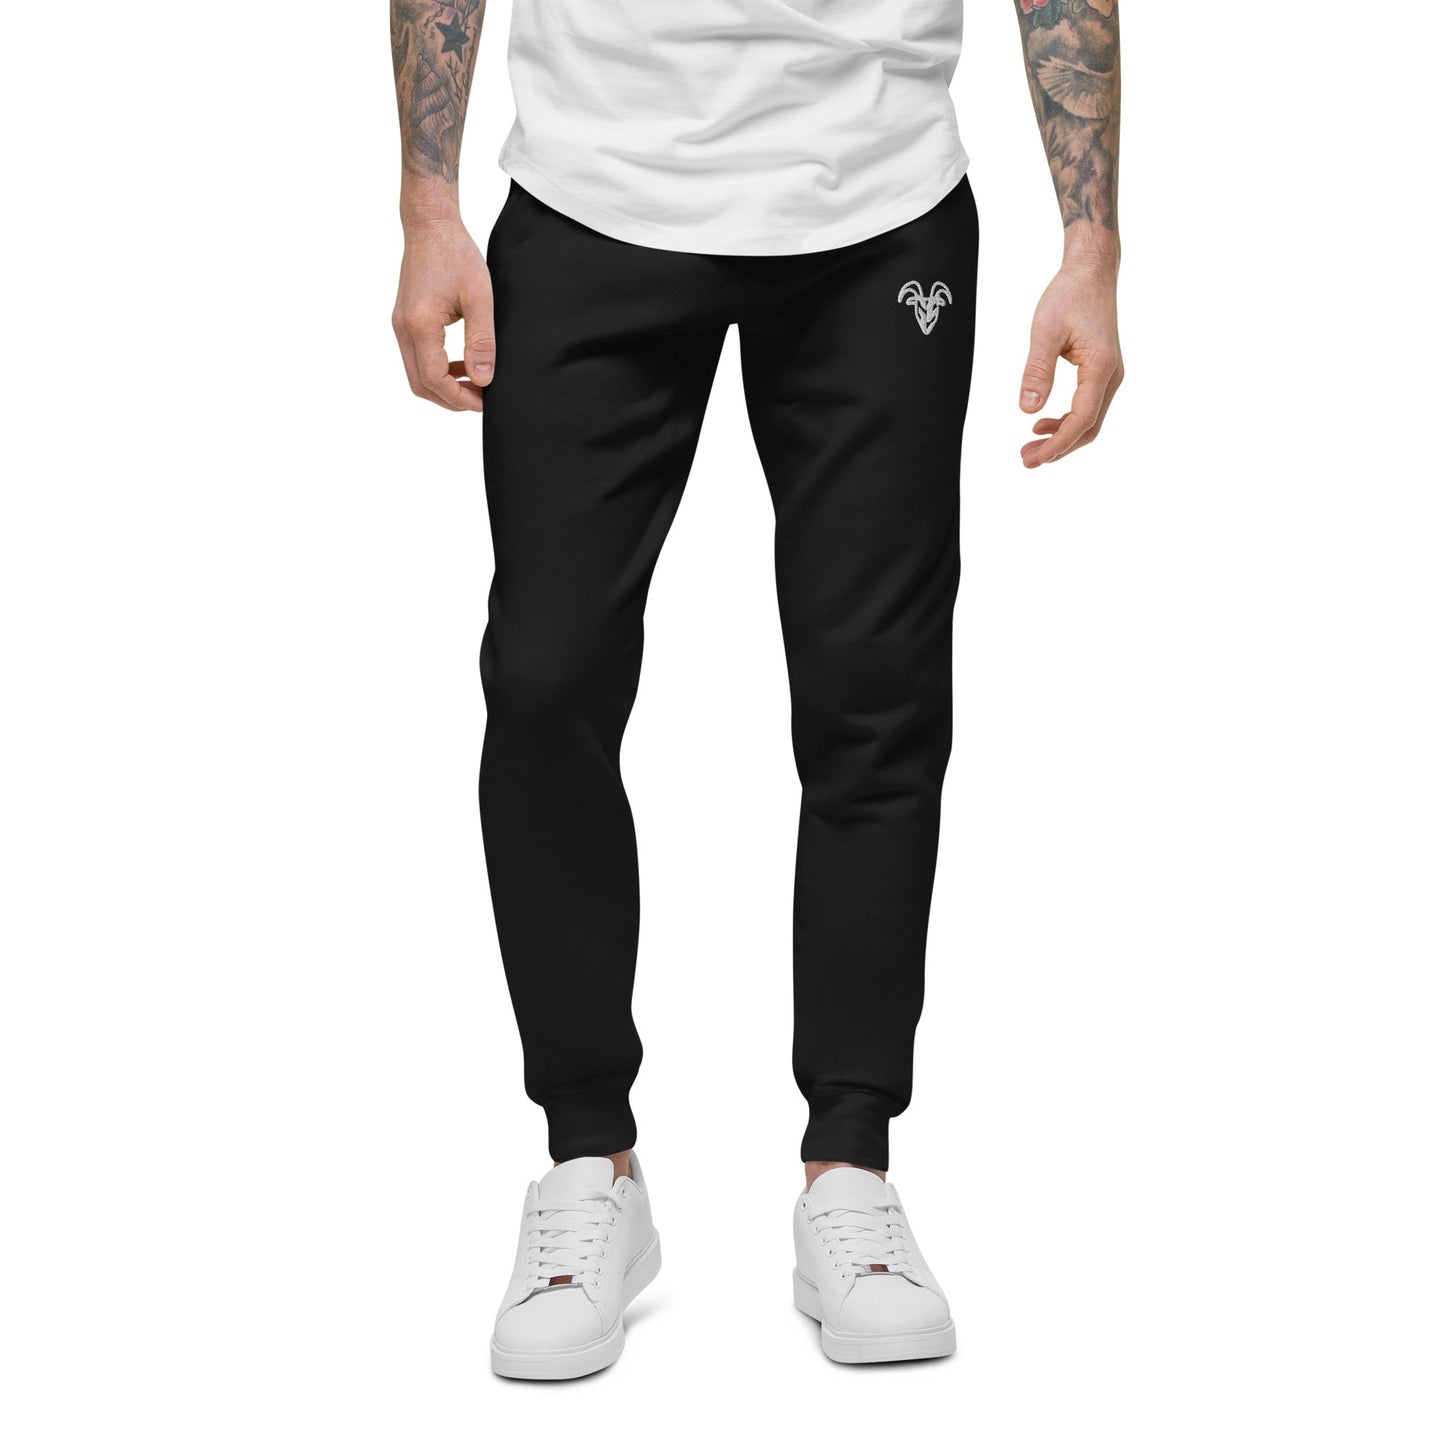 Embroidered Goat Gym Joggers – The GOAT Strength